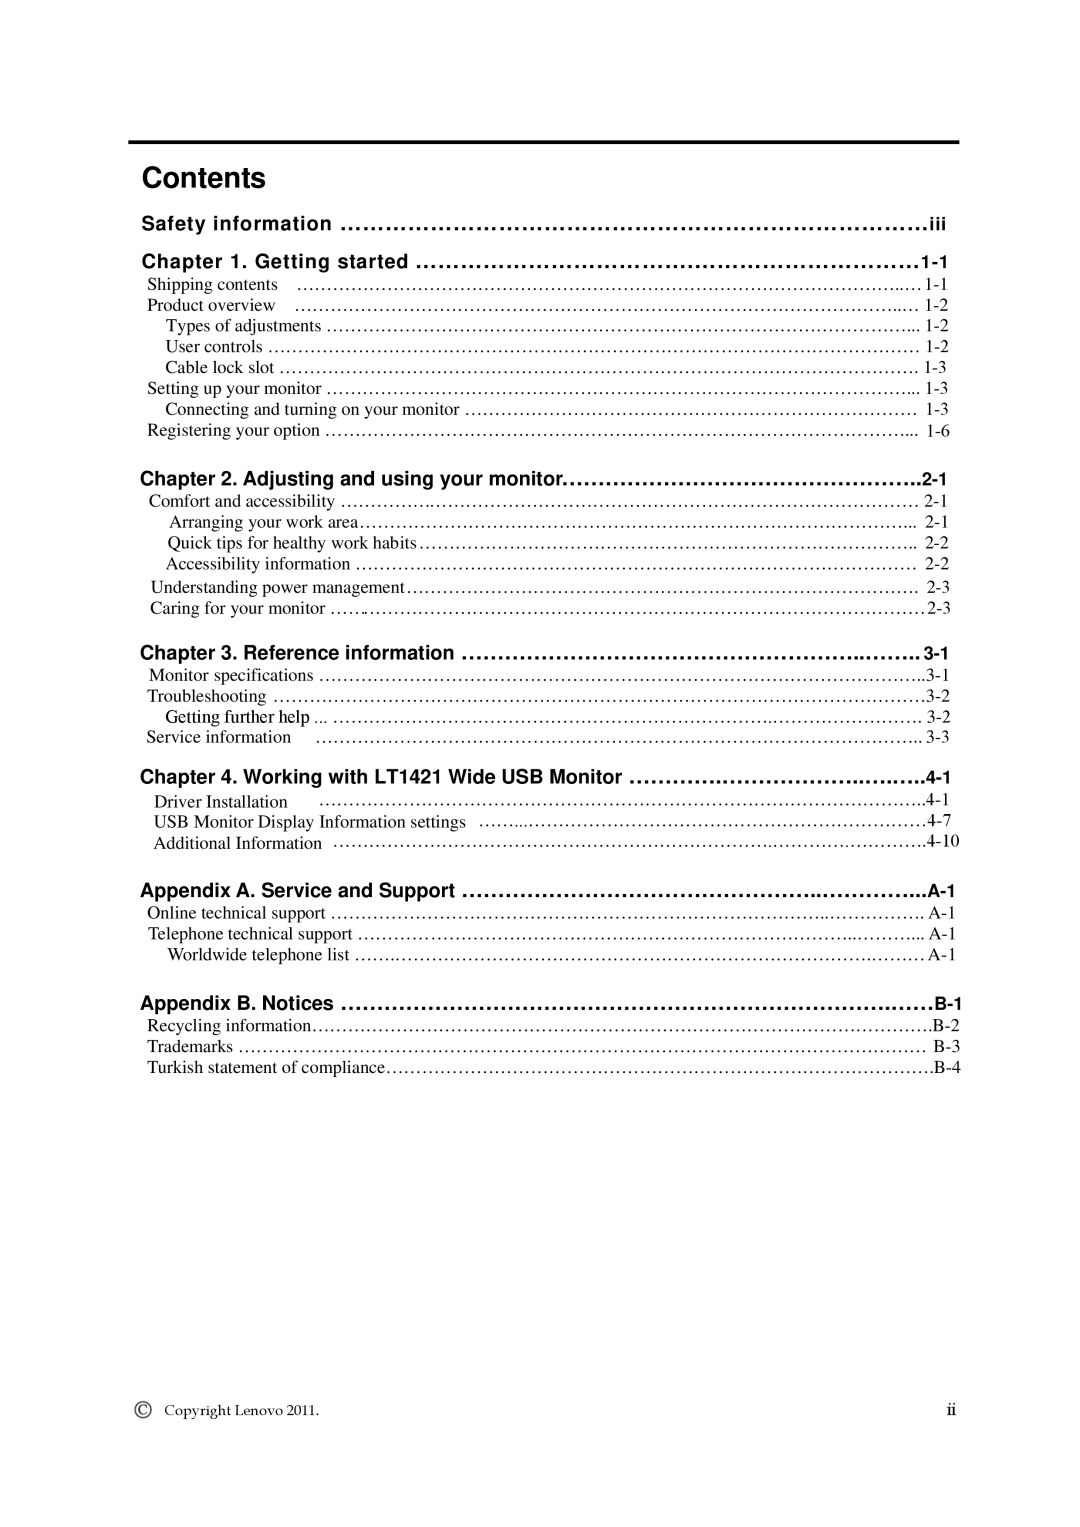 Lenovo 1452DB6 manual Contents, Safety information ……………………………………………………………………iii 